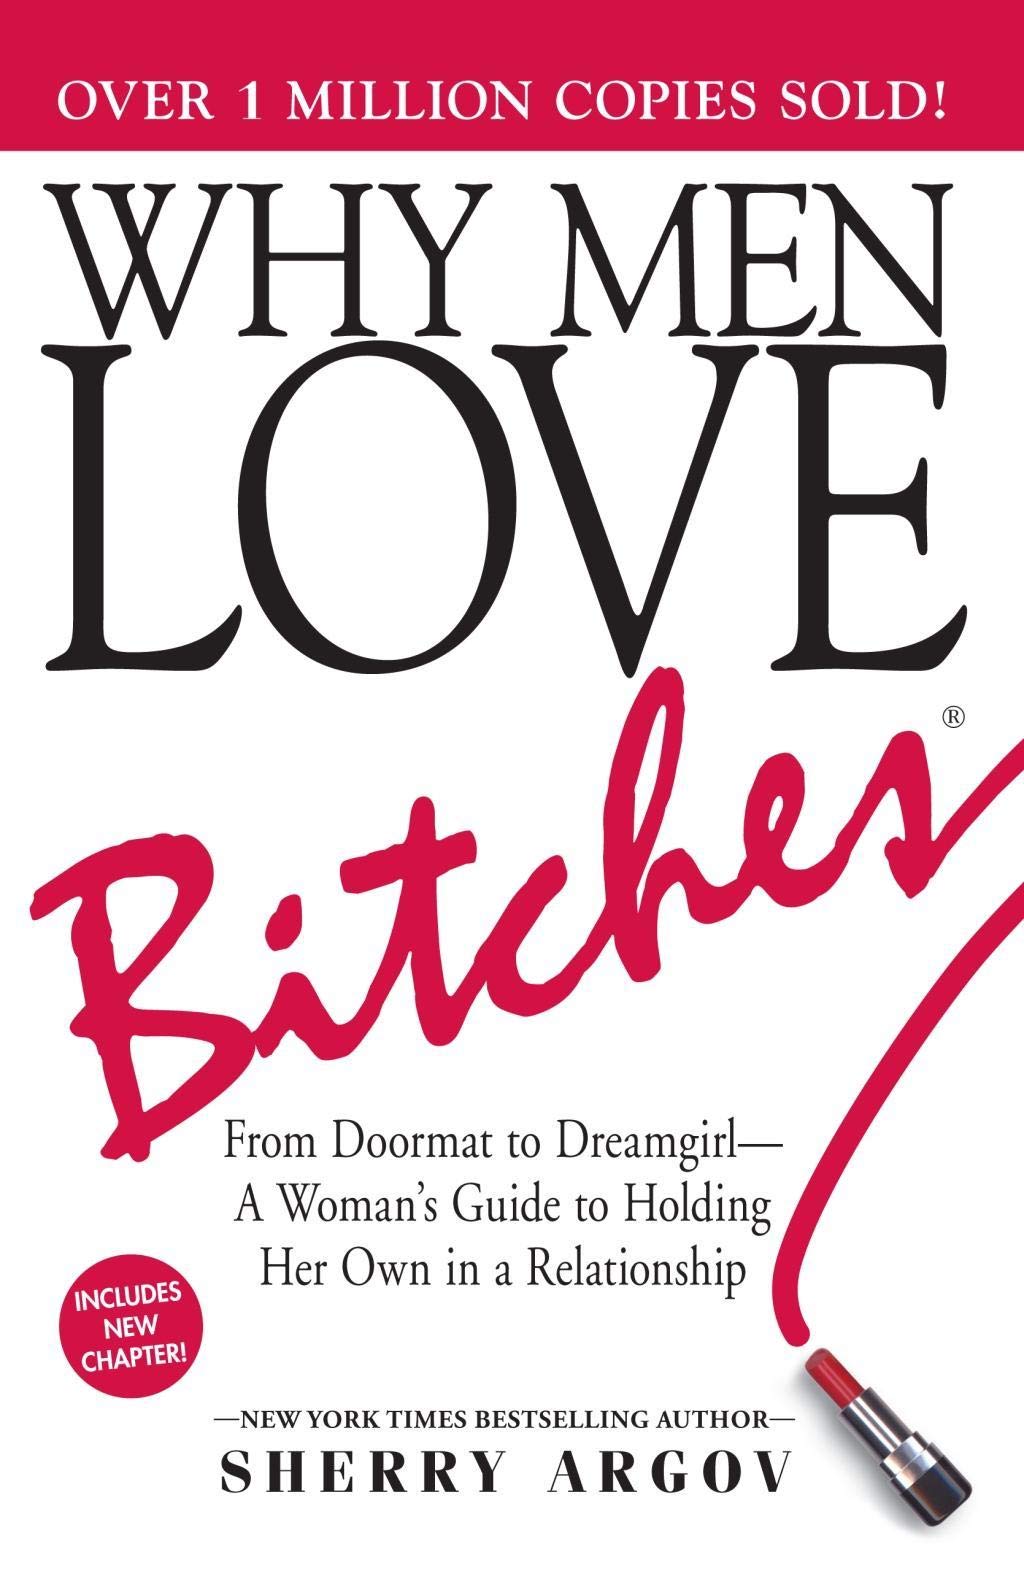 Livre ISBN 1580627560 Why Men Love Bitches: From Doormat to Dreamgirl - A Woman's Guide to Holding Her Own in a Relationship (Sherry Argov)